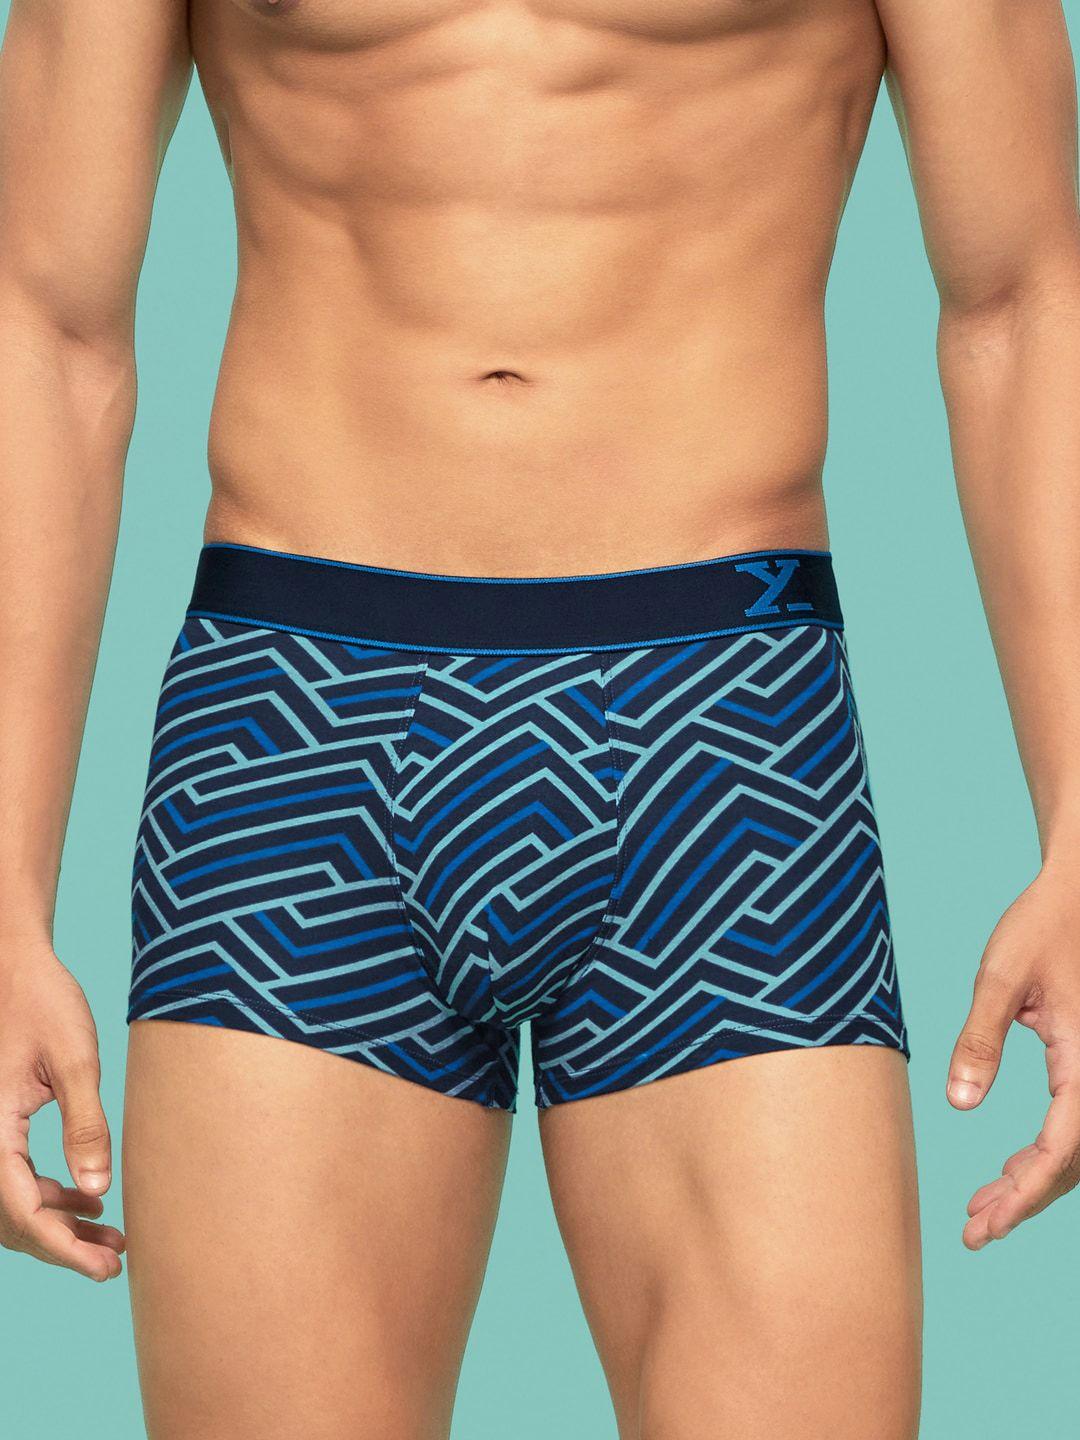 xyxx men abstract printed cotton breathable trunks xytrnk207